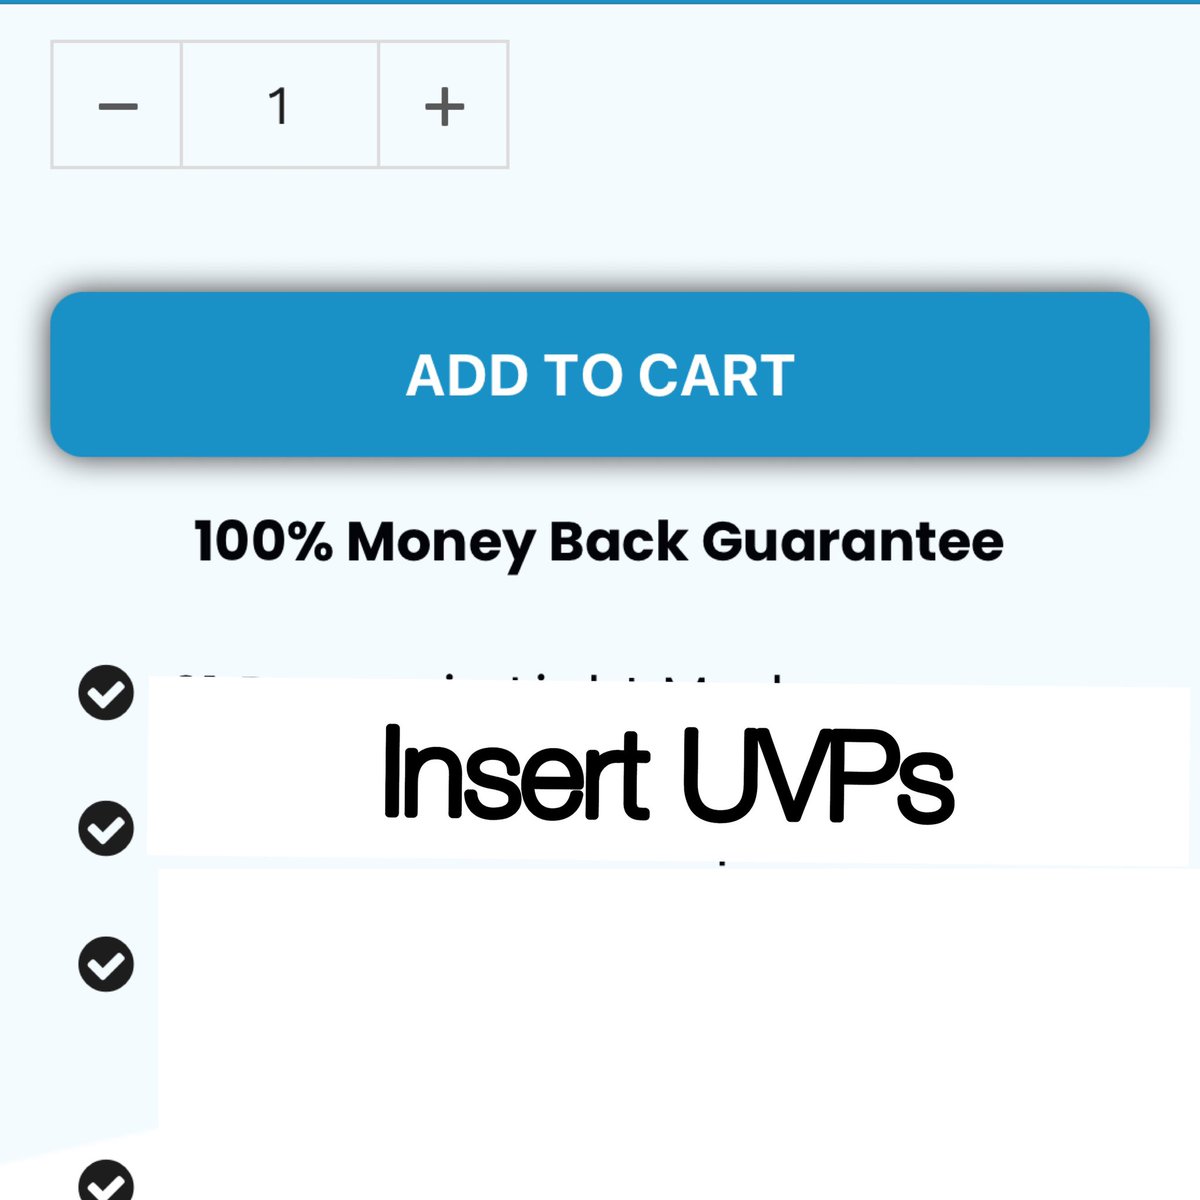 3 things in one pics:1. Shadow around add to cart2. 100% money back guarantee under ATC3. UVPs under guaranteeBonus: if you have a good trustpilot rating, add that under guarantee.